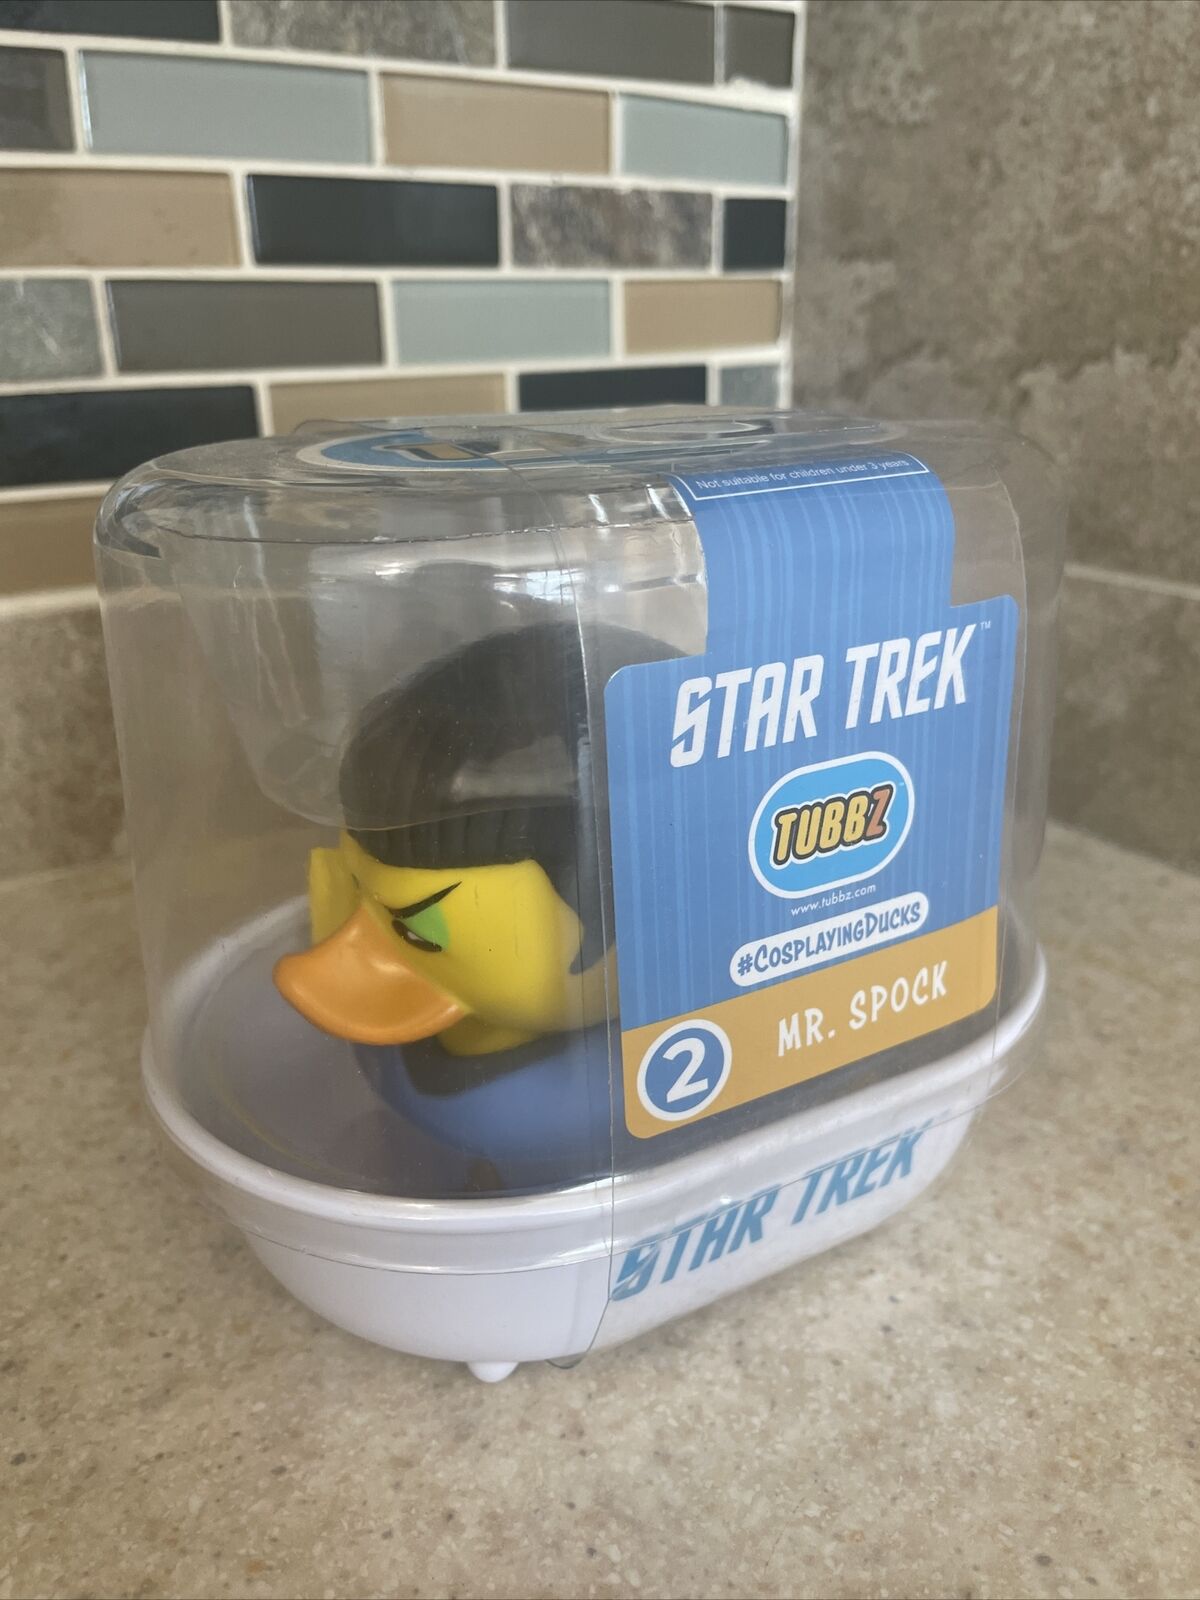 TUBBZ Star Trek Spock Collectible Rubber Duck Figurine Sealed New Official Star